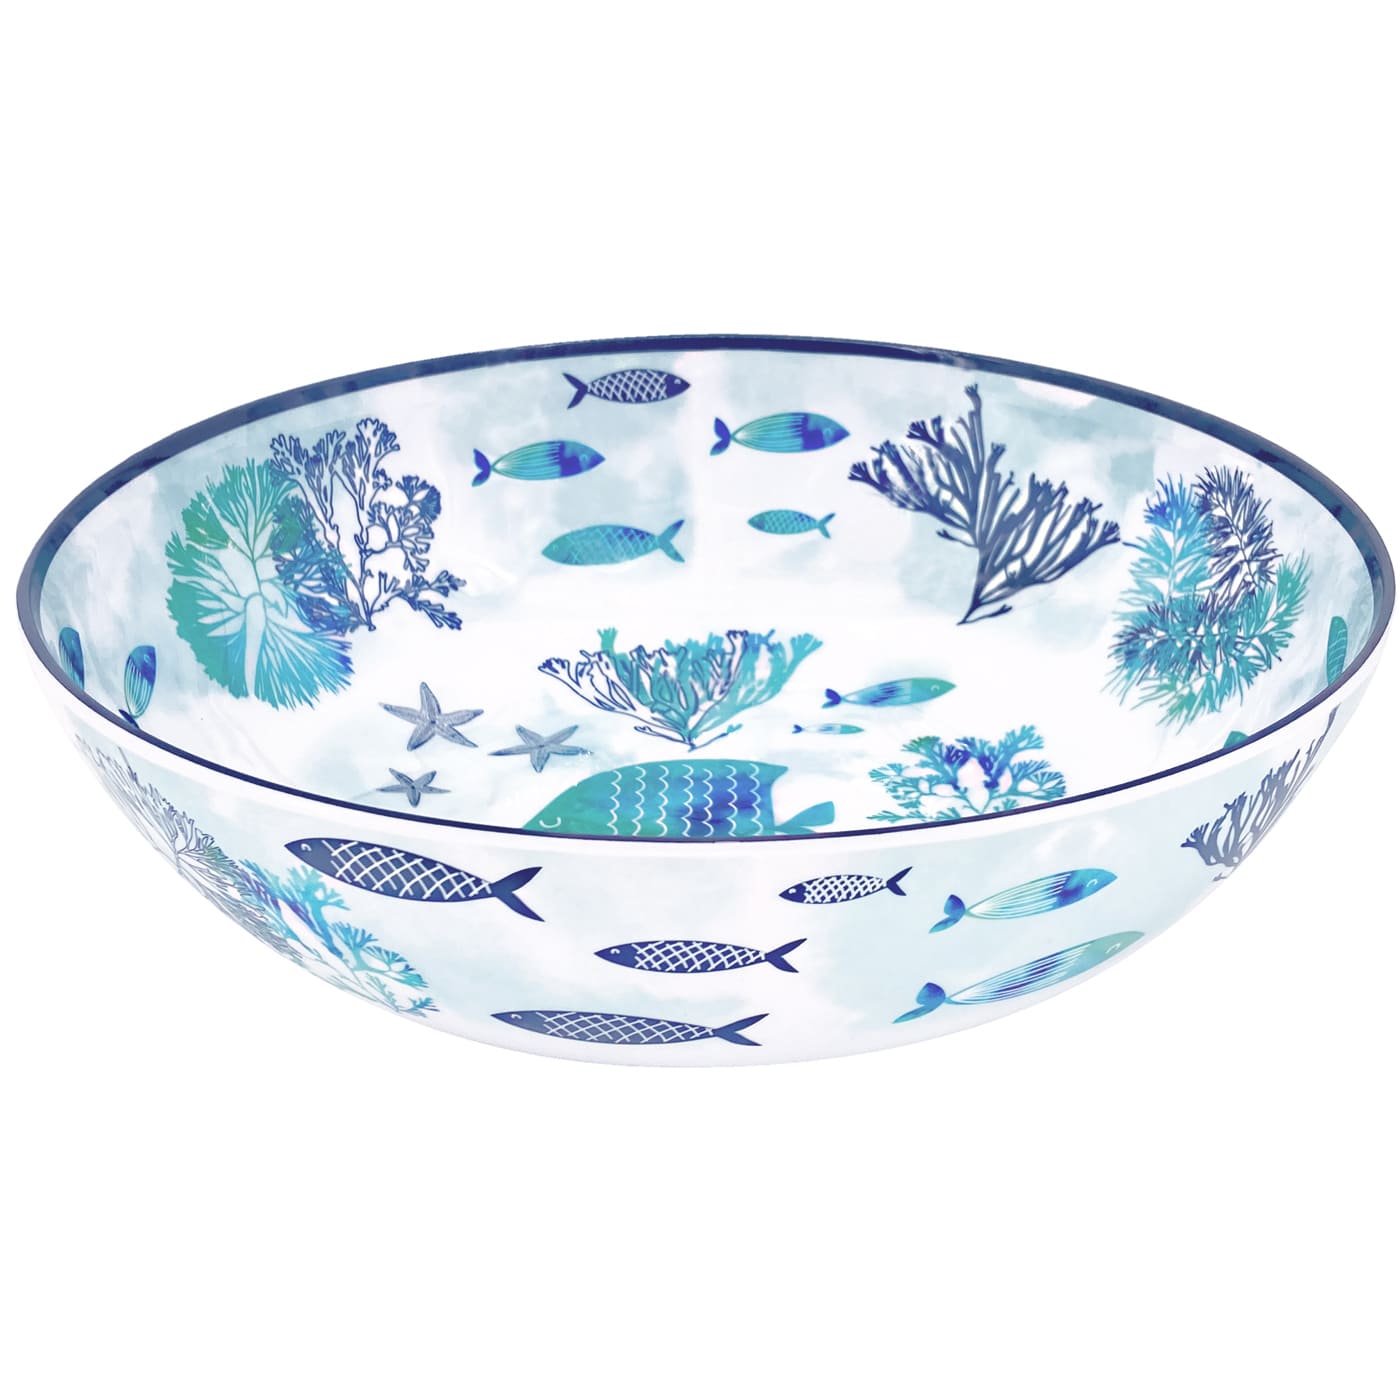 Tropical Birds Blue and Green Decorated Bowl of The MelARTmine Tableware Collection Les Jardins de la Comtesse 25 cm Deep Salad Bowl in Pure Melamine with Bamboo Outline 